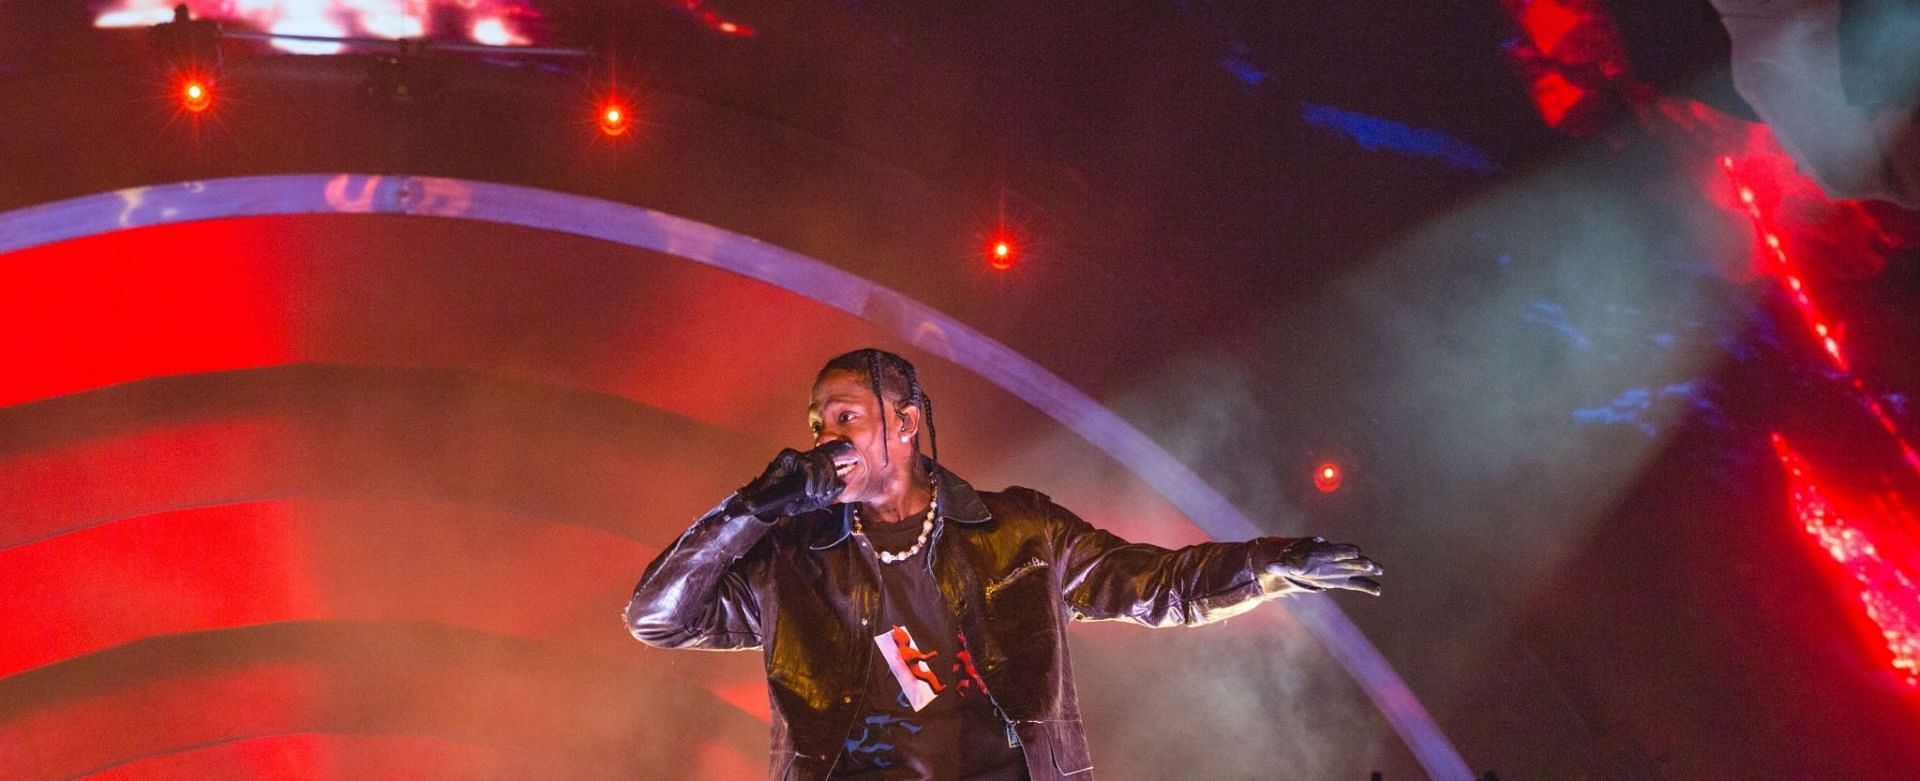 Travis Scott previously said he was &quot;devastated&quot; over the Astroworld tragedy (Image via Rick Kern/Getty Images)